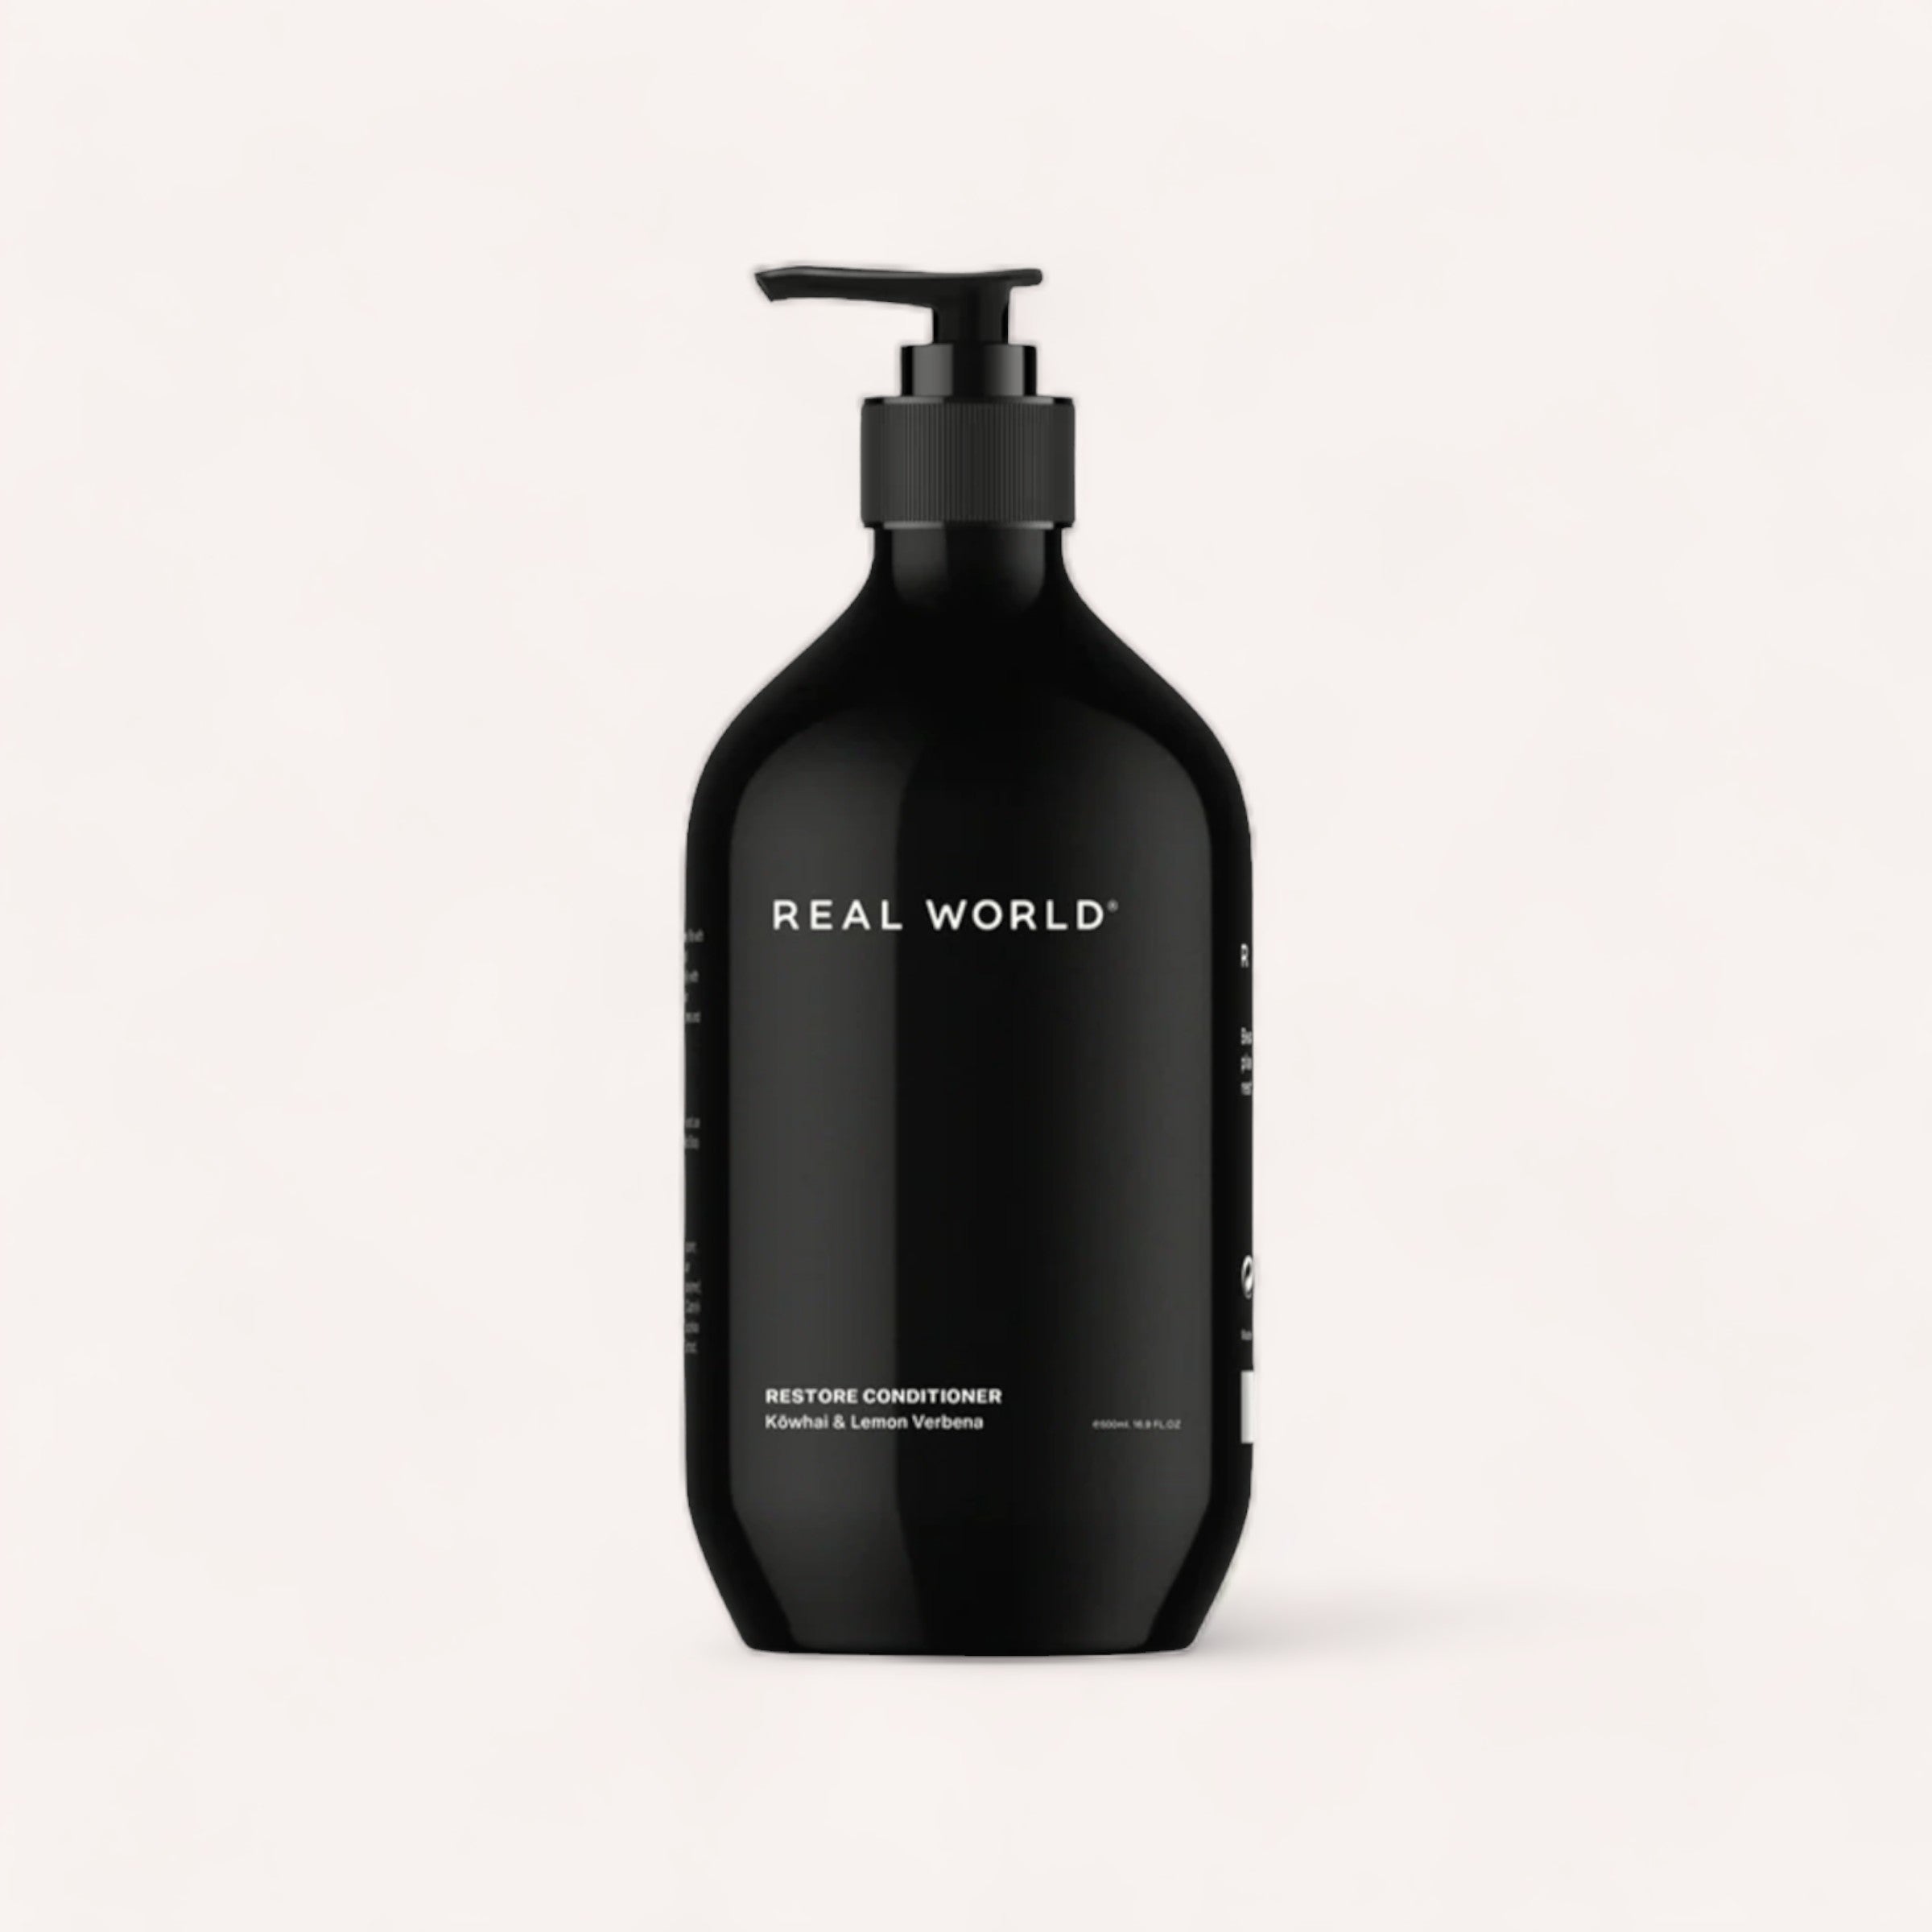 Minimalist design black bottle of 'Real World' Conditioner, a plant-based refillable conditioner, against a plain background.